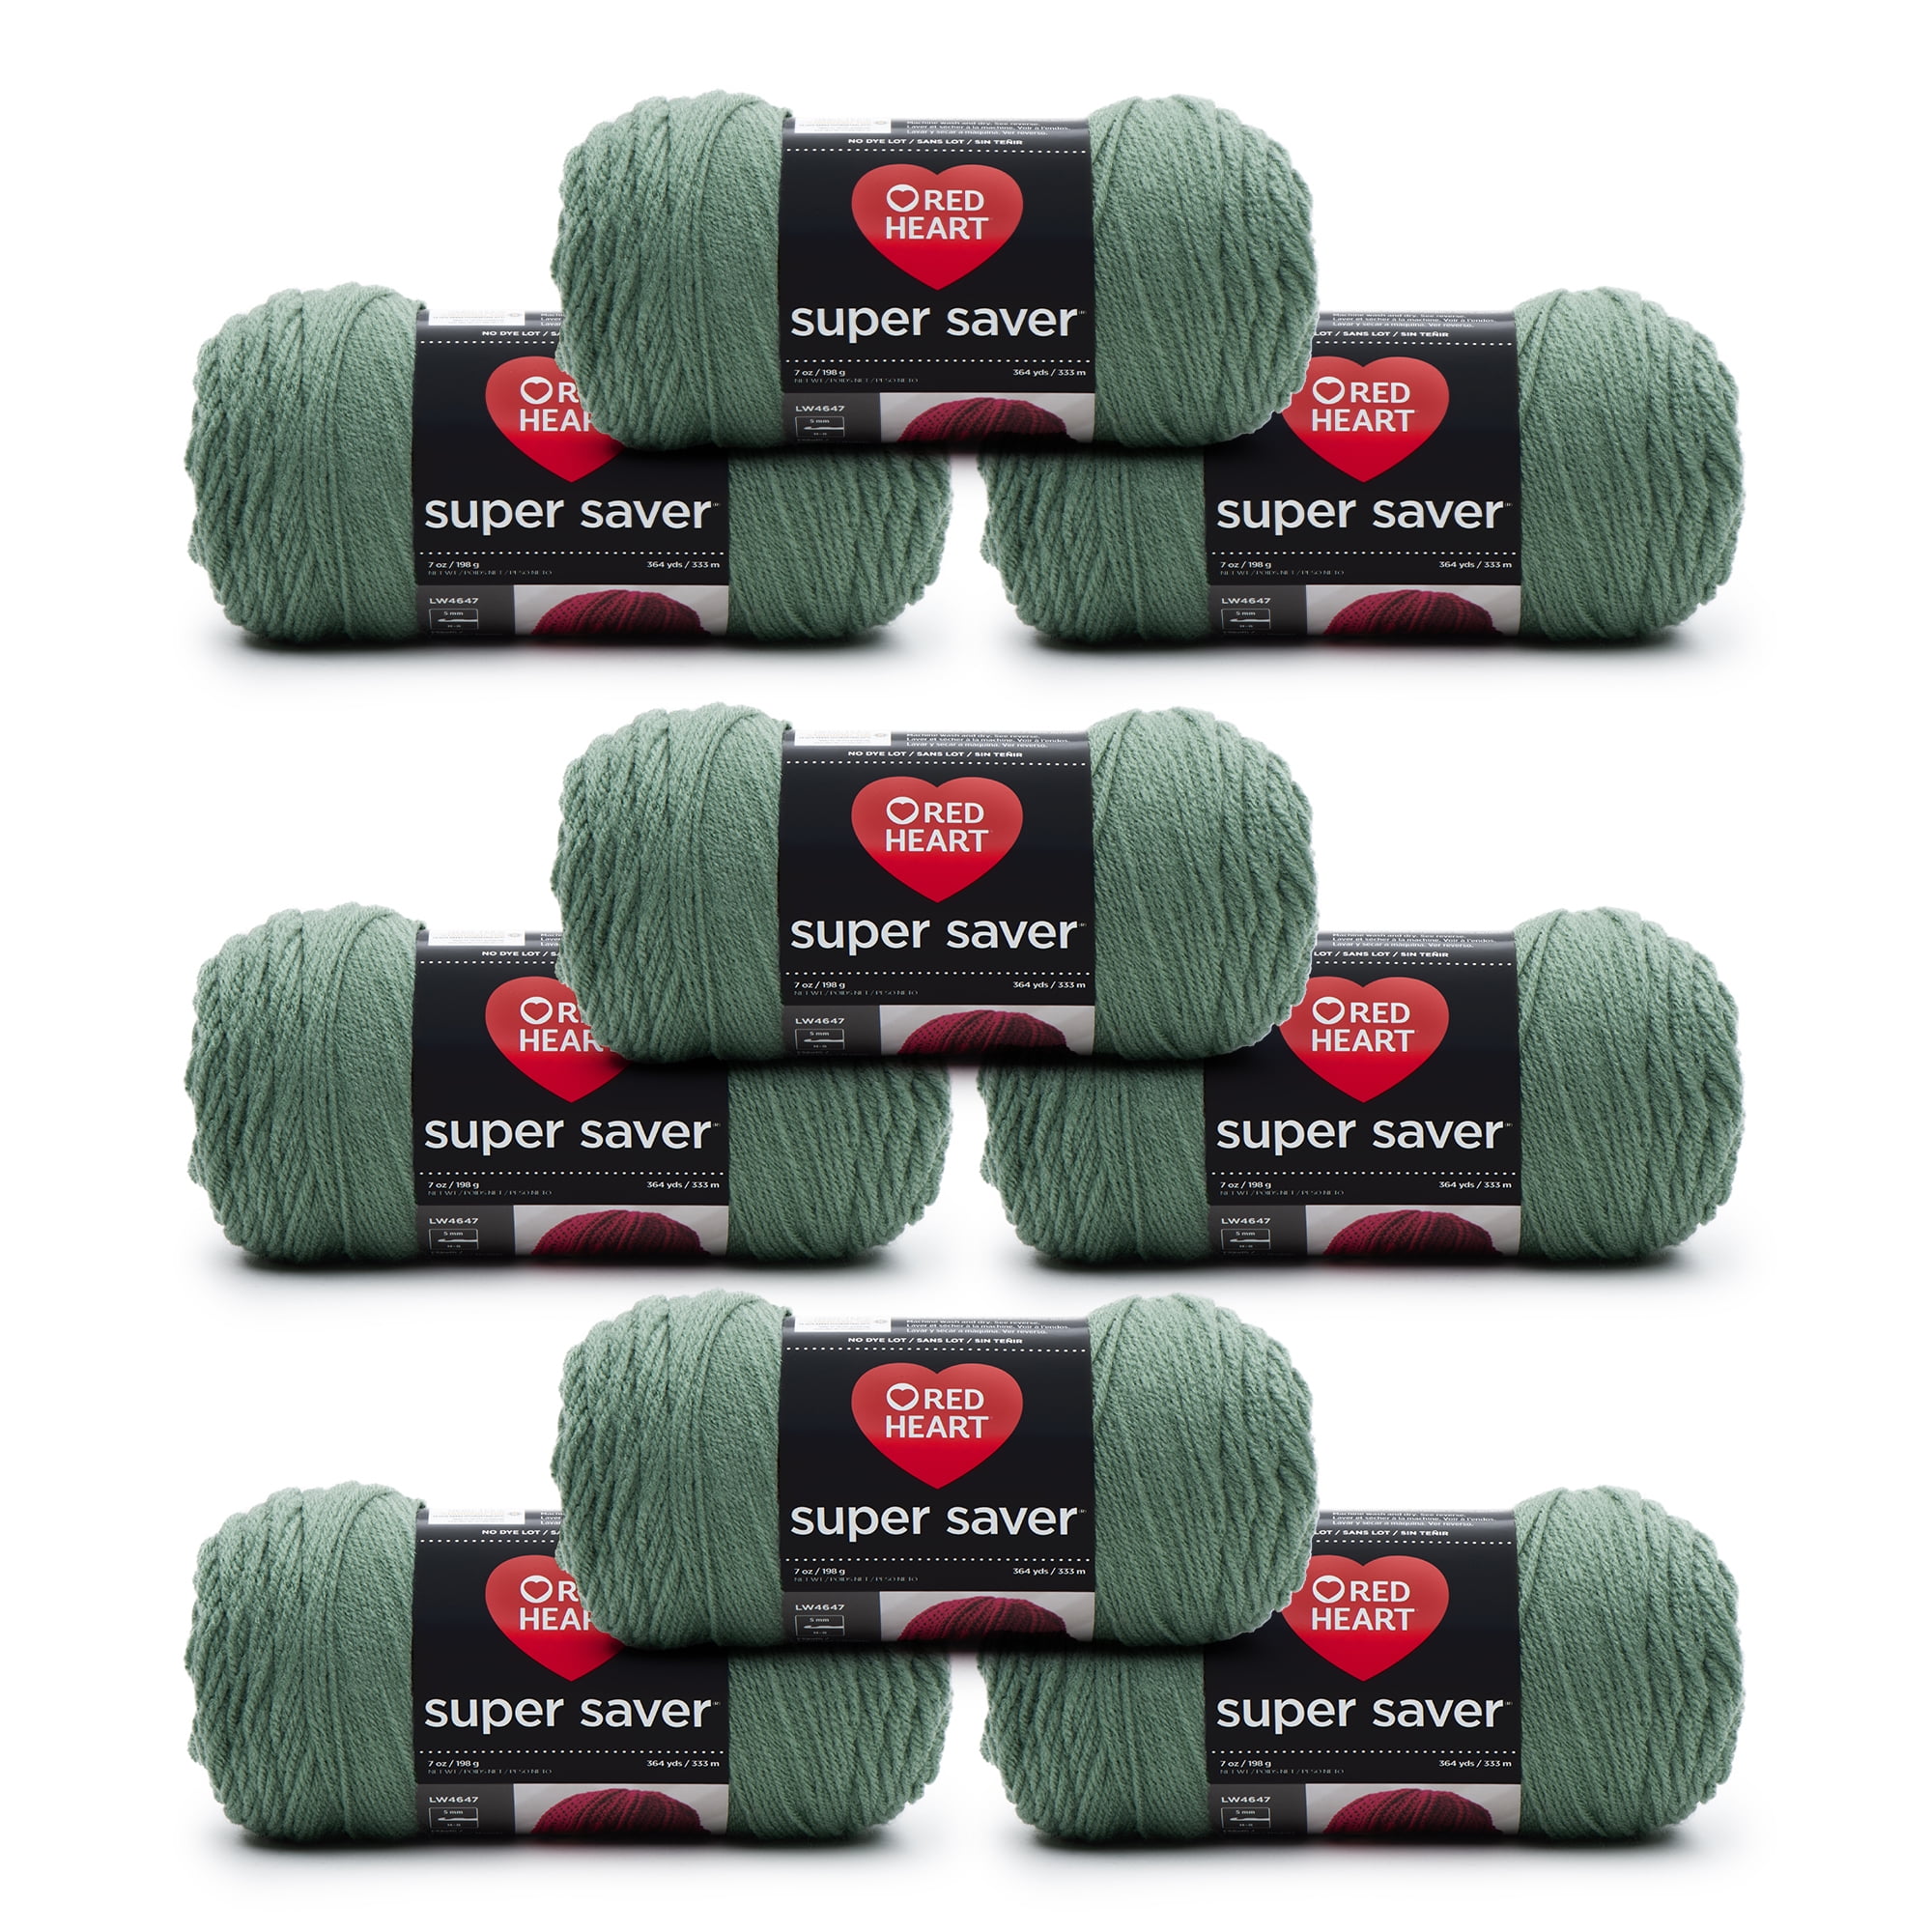  Red Heart with Love Stone Yarn - 3 Pack of 198g/7oz